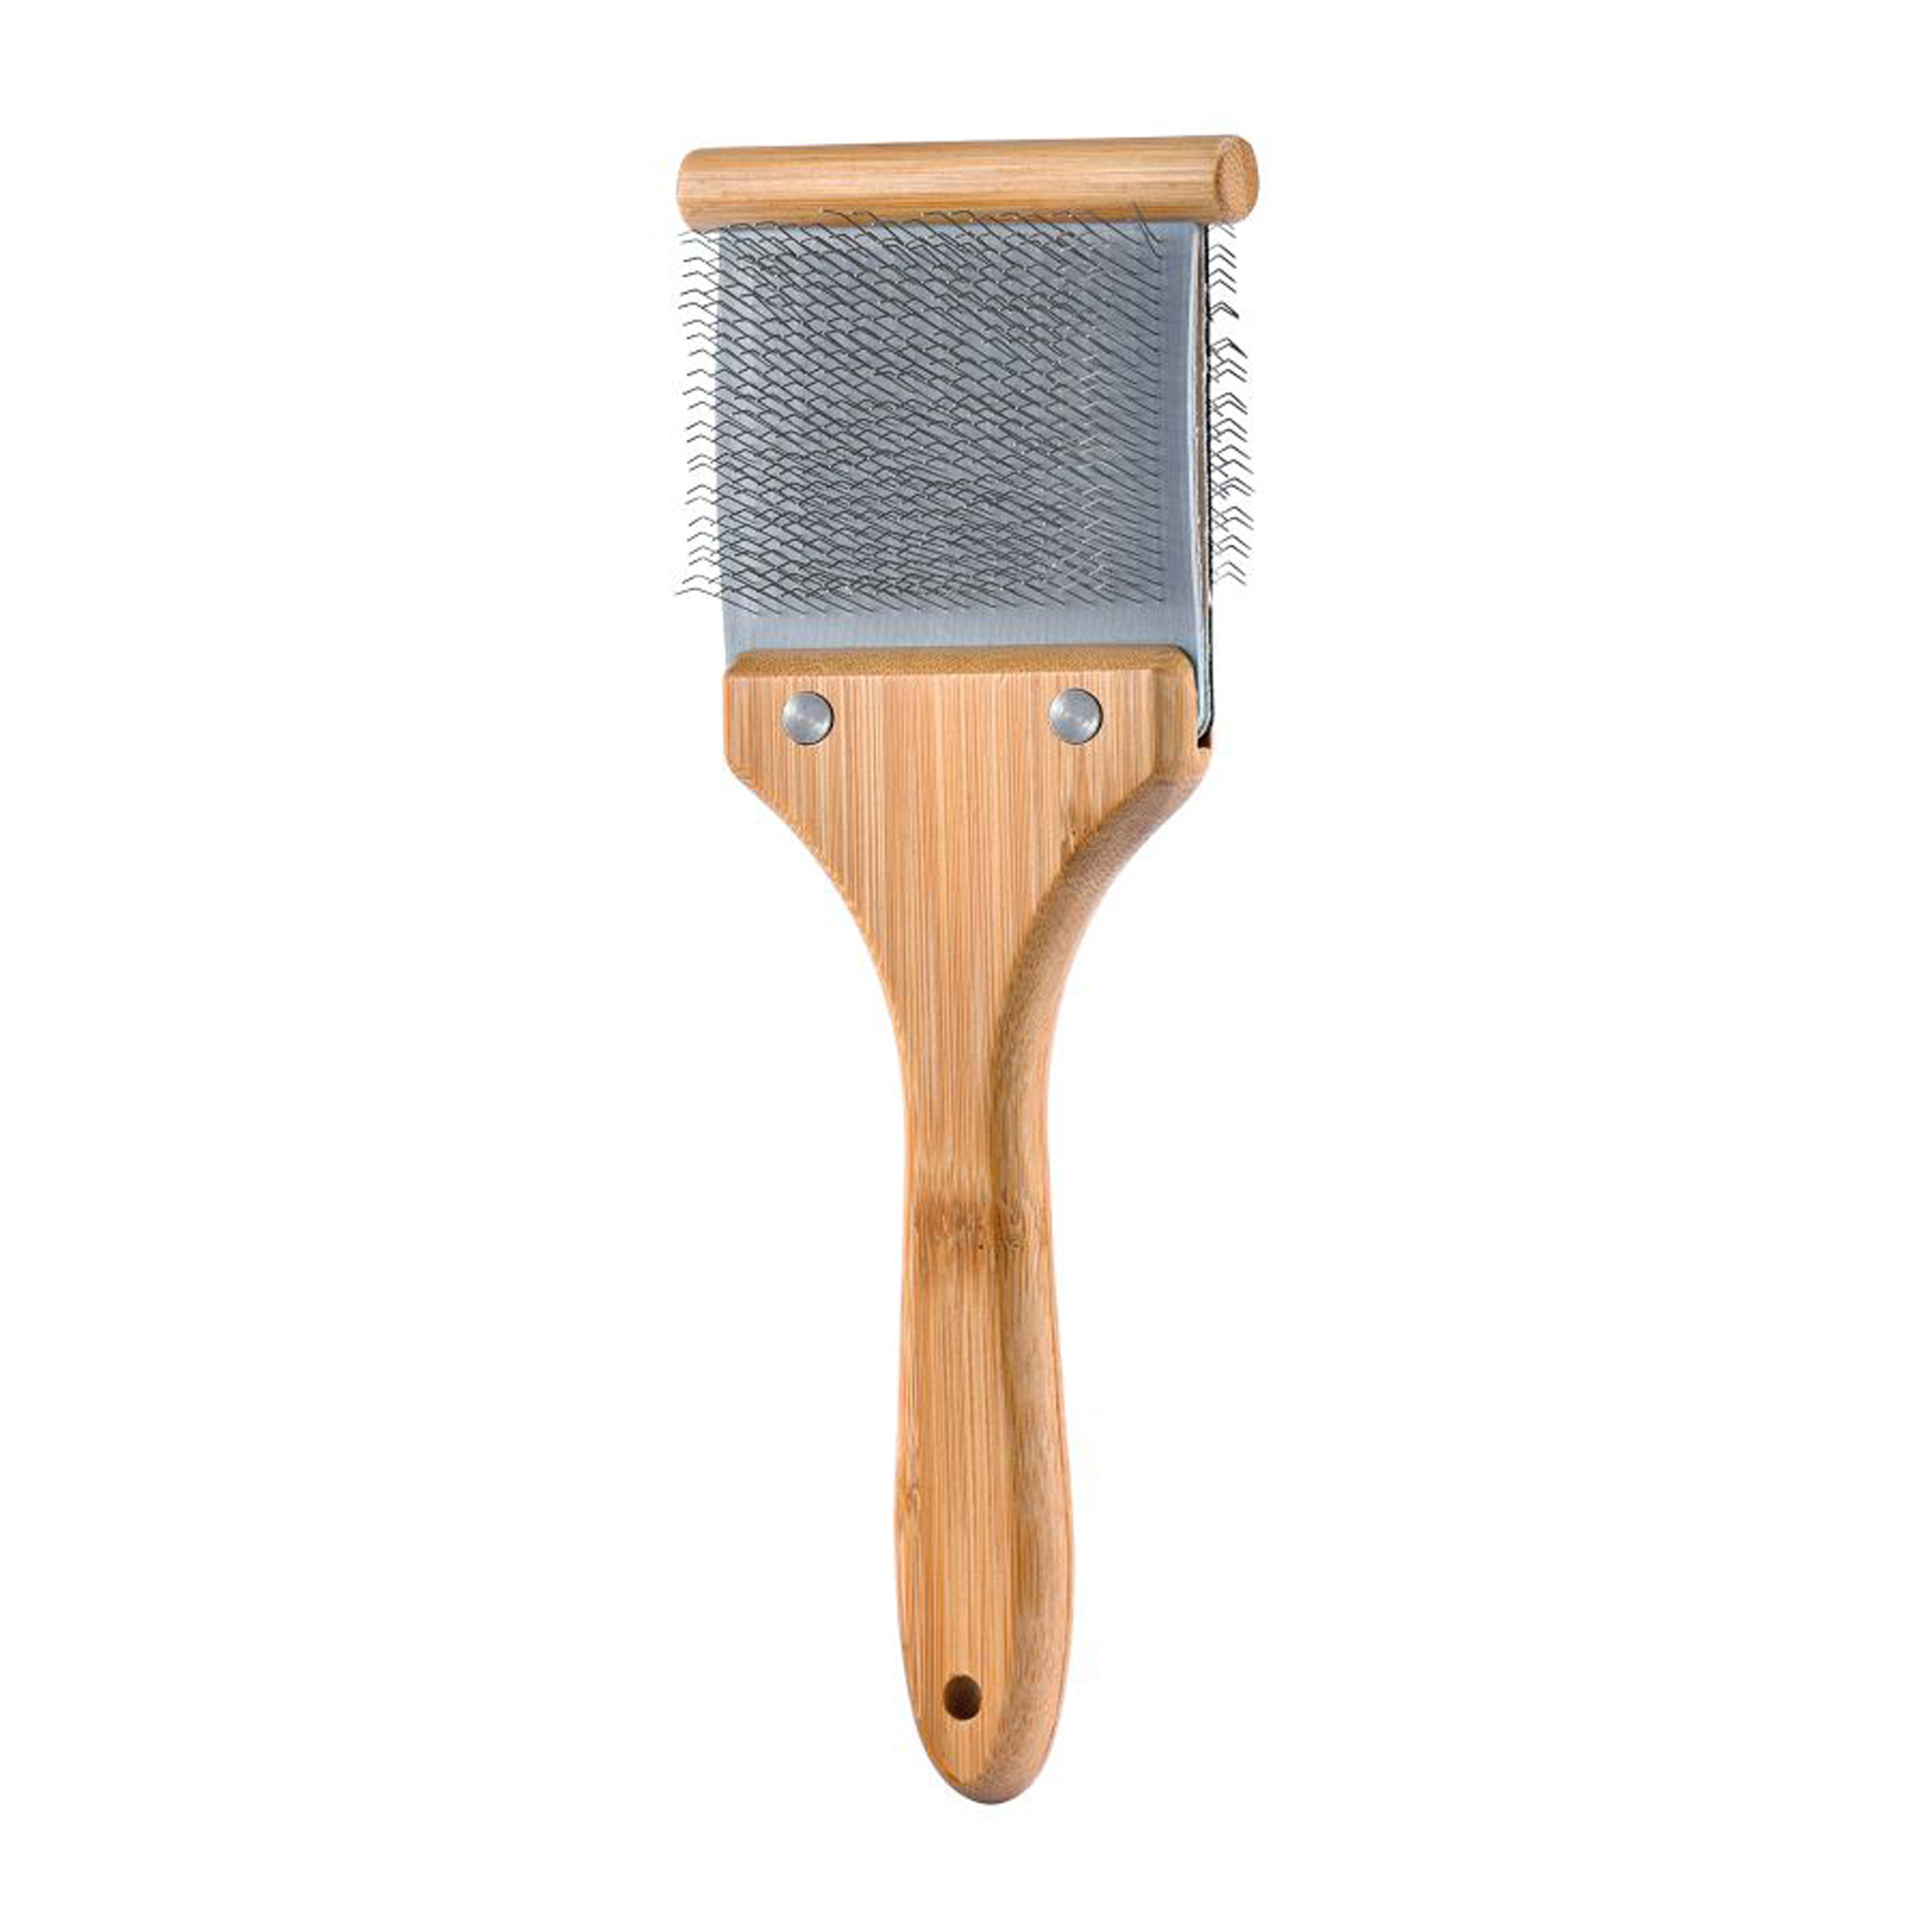 Soft Bristle Dog Brush For Short Haired Cats Or Dogs - Firm Bristles To  Remove Dust, Dirt, And Loose Fur - Hook And Rubber Handle